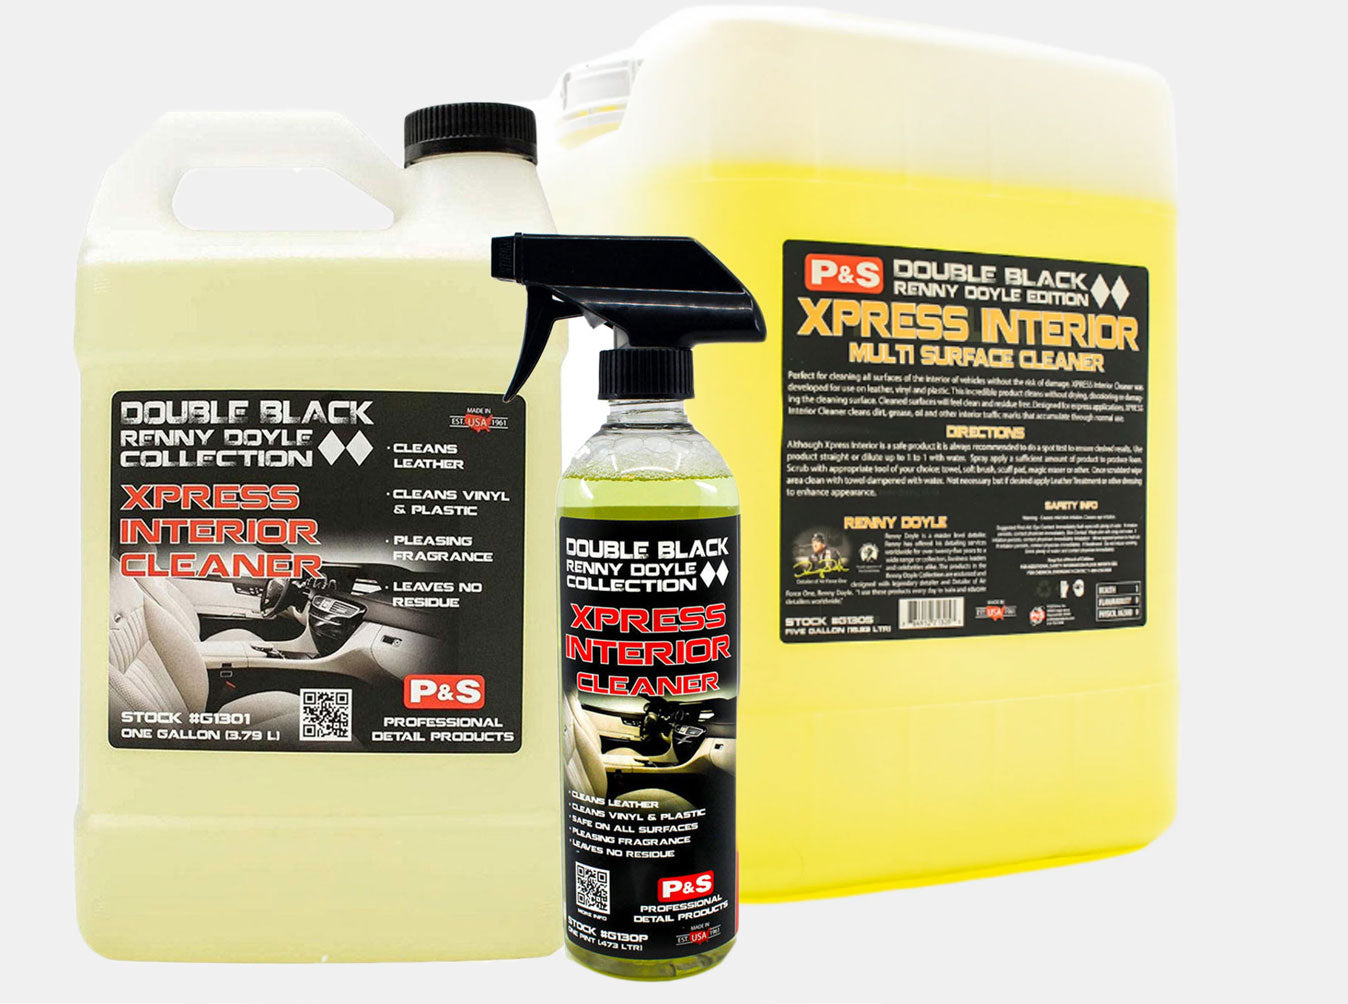  P&S Professional Detail Products - Xpress Interior Cleaner -  Perfect for Cleaning All Vehicle Interior Surfaces of Dirt, Grease, and  Oil; Works on Leather, Vinyl, and Plastic (1 Gallon + 1 Quart) : Automotive